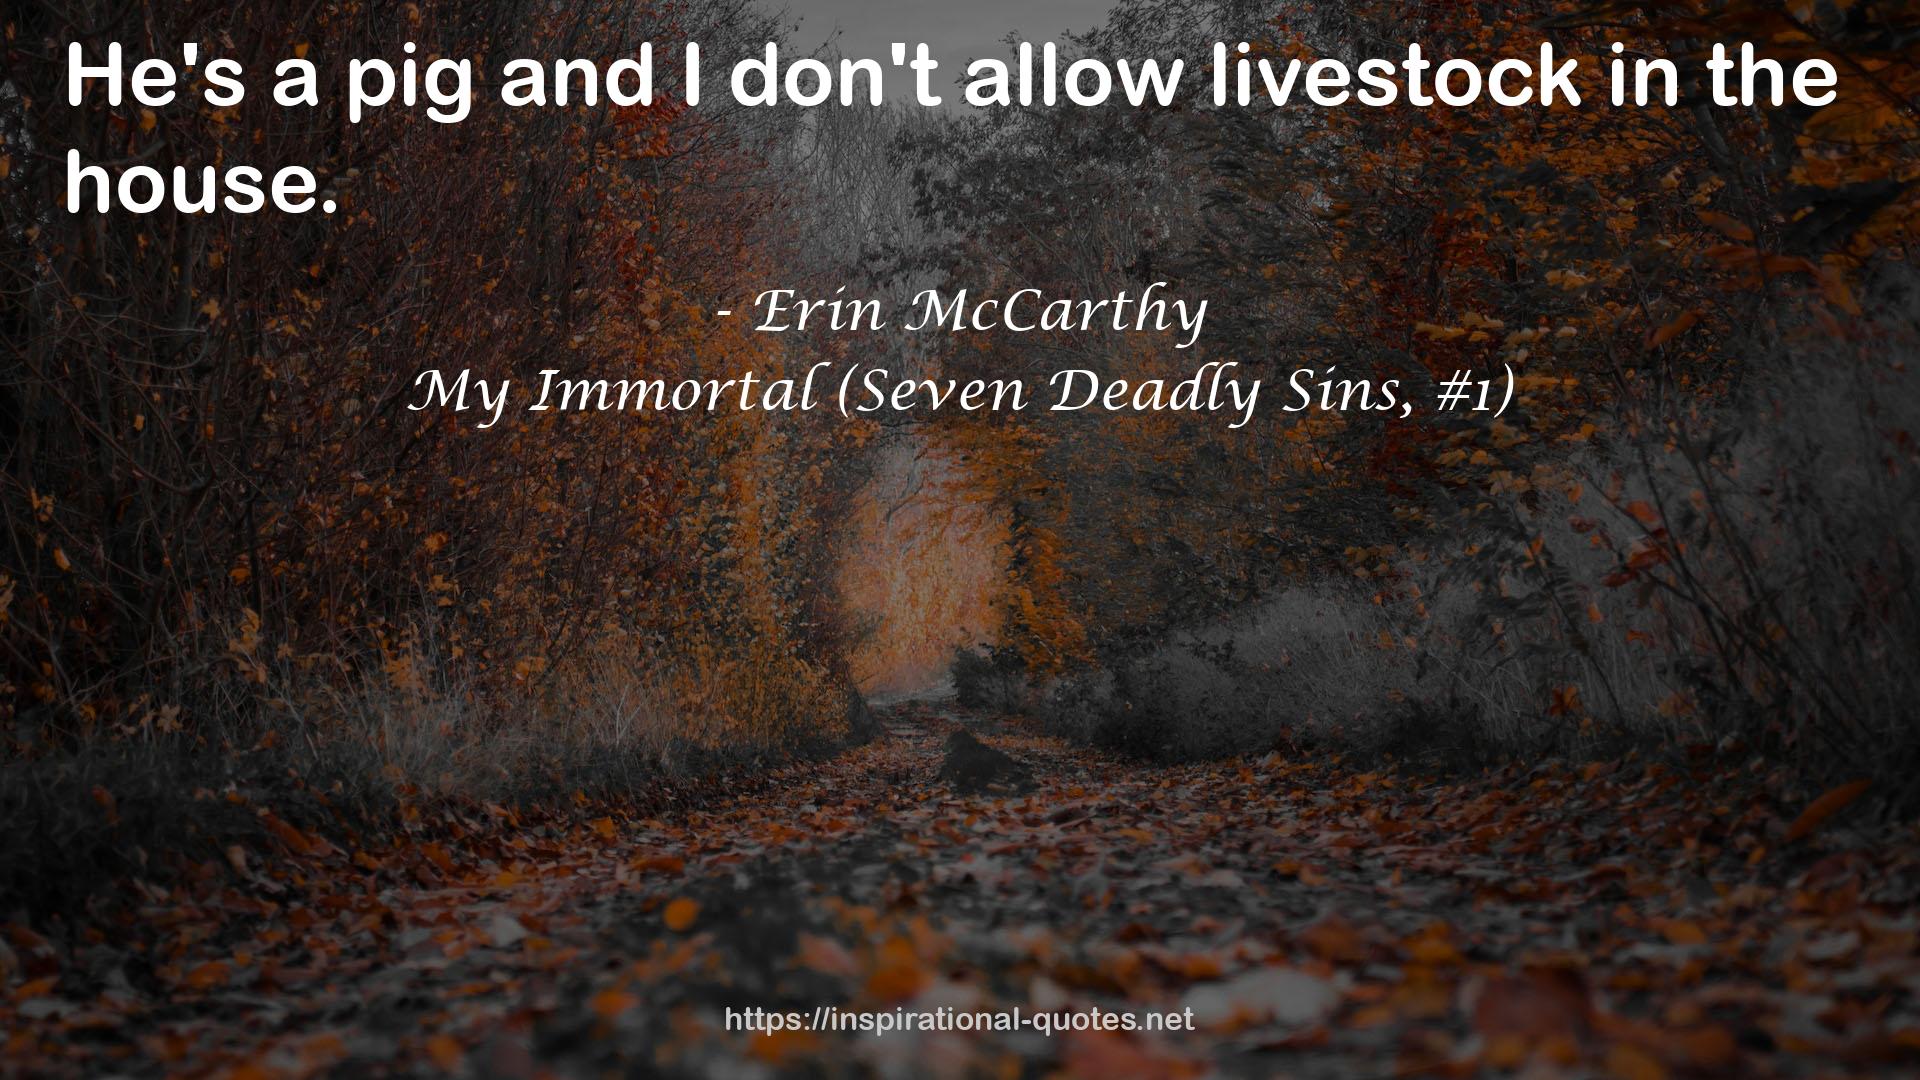 My Immortal (Seven Deadly Sins, #1) QUOTES